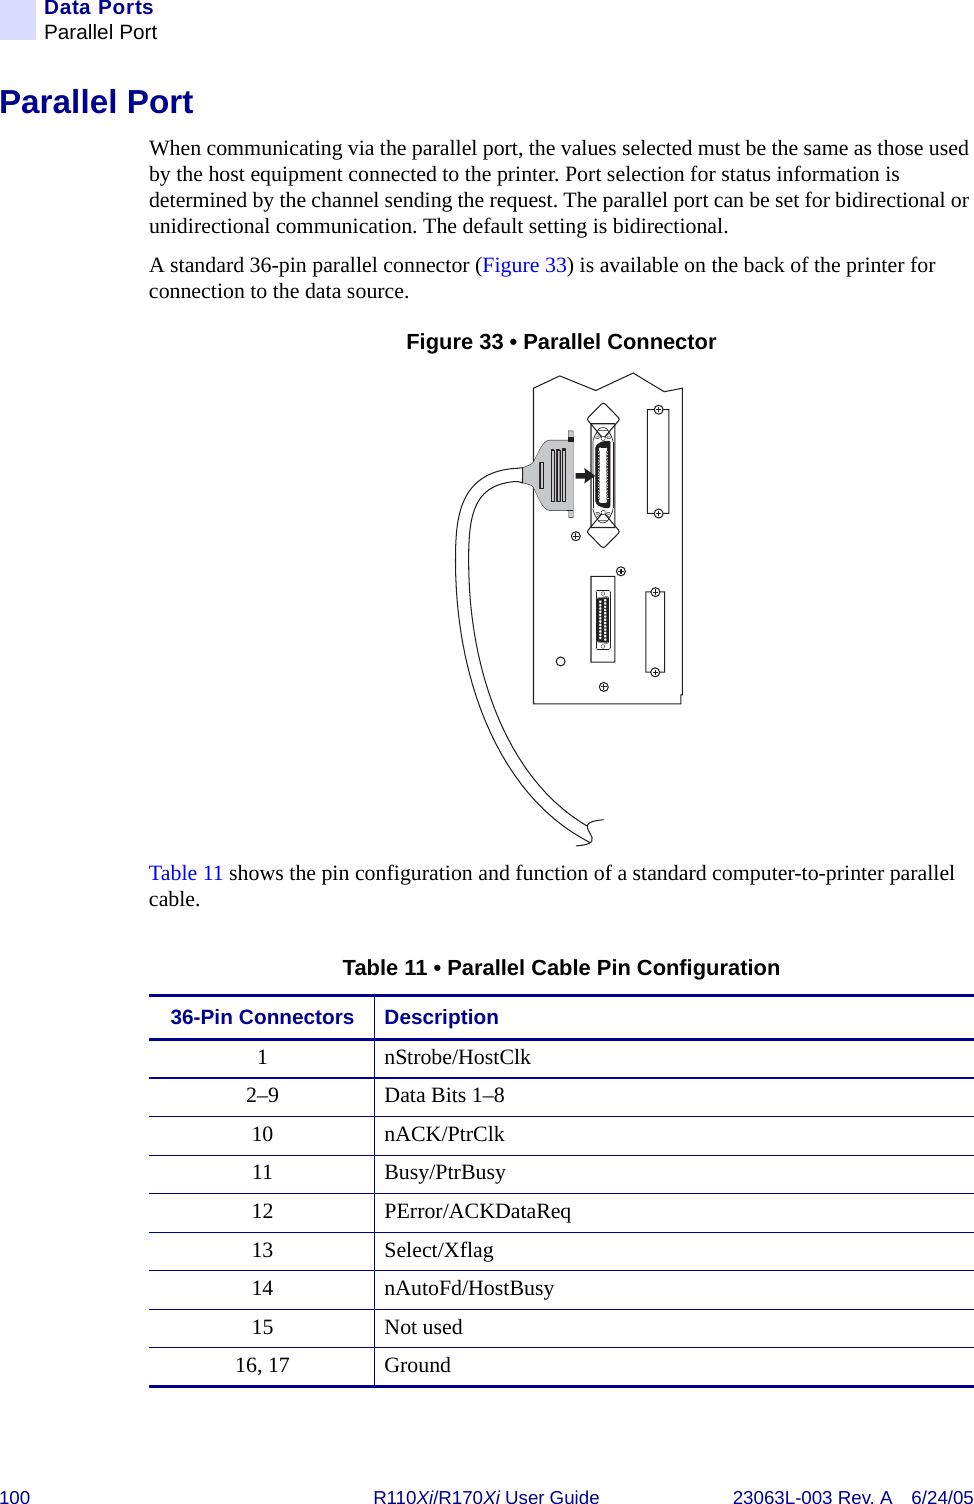 100 R110Xi/R170Xi User Guide 23063L-003 Rev. A 6/24/05Data PortsParallel PortParallel PortWhen communicating via the parallel port, the values selected must be the same as those used by the host equipment connected to the printer. Port selection for status information is determined by the channel sending the request. The parallel port can be set for bidirectional or unidirectional communication. The default setting is bidirectional.A standard 36-pin parallel connector (Figure 33) is available on the back of the printer for connection to the data source.Figure 33 • Parallel ConnectorTable 11 shows the pin configuration and function of a standard computer-to-printer parallel cable.Table 11 • Parallel Cable Pin Configuration36-Pin Connectors Description1 nStrobe/HostClk2–9 Data Bits 1–810 nACK/PtrClk11 Busy/PtrBusy12 PError/ACKDataReq13 Select/Xflag14 nAutoFd/HostBusy15 Not used16, 17 Ground